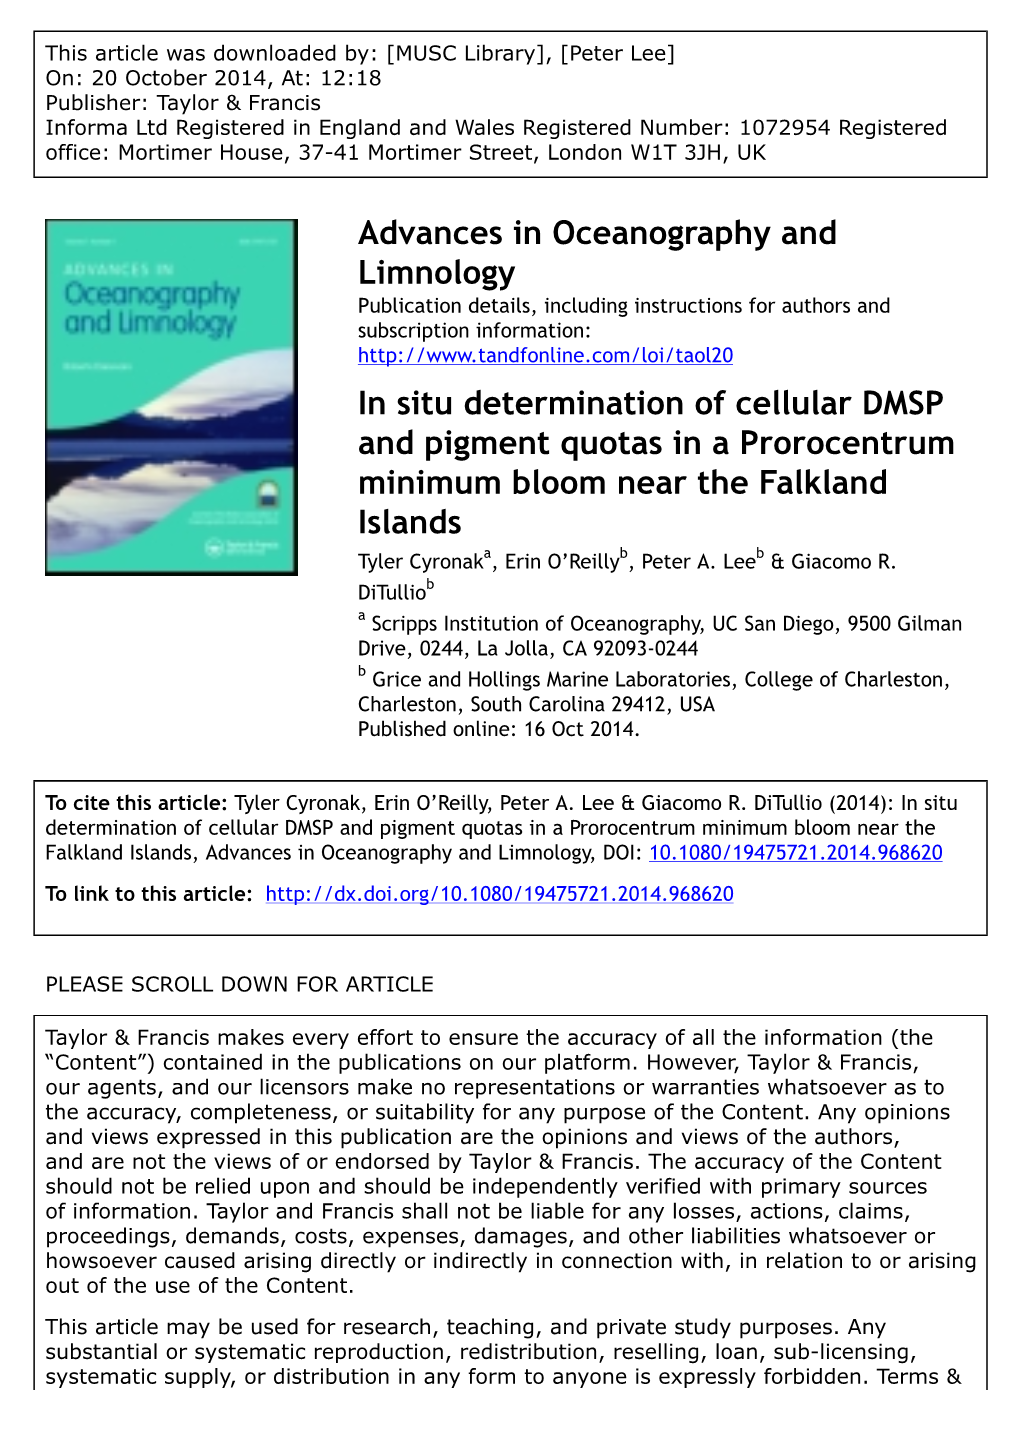 In Situ Determination of Cellular DMSP and Pigment Quotas in a Prorocentrum Minimum Bloom Near the Falkland Islands Tyler Cyronaka, Erin O’Reilly B, Peter A